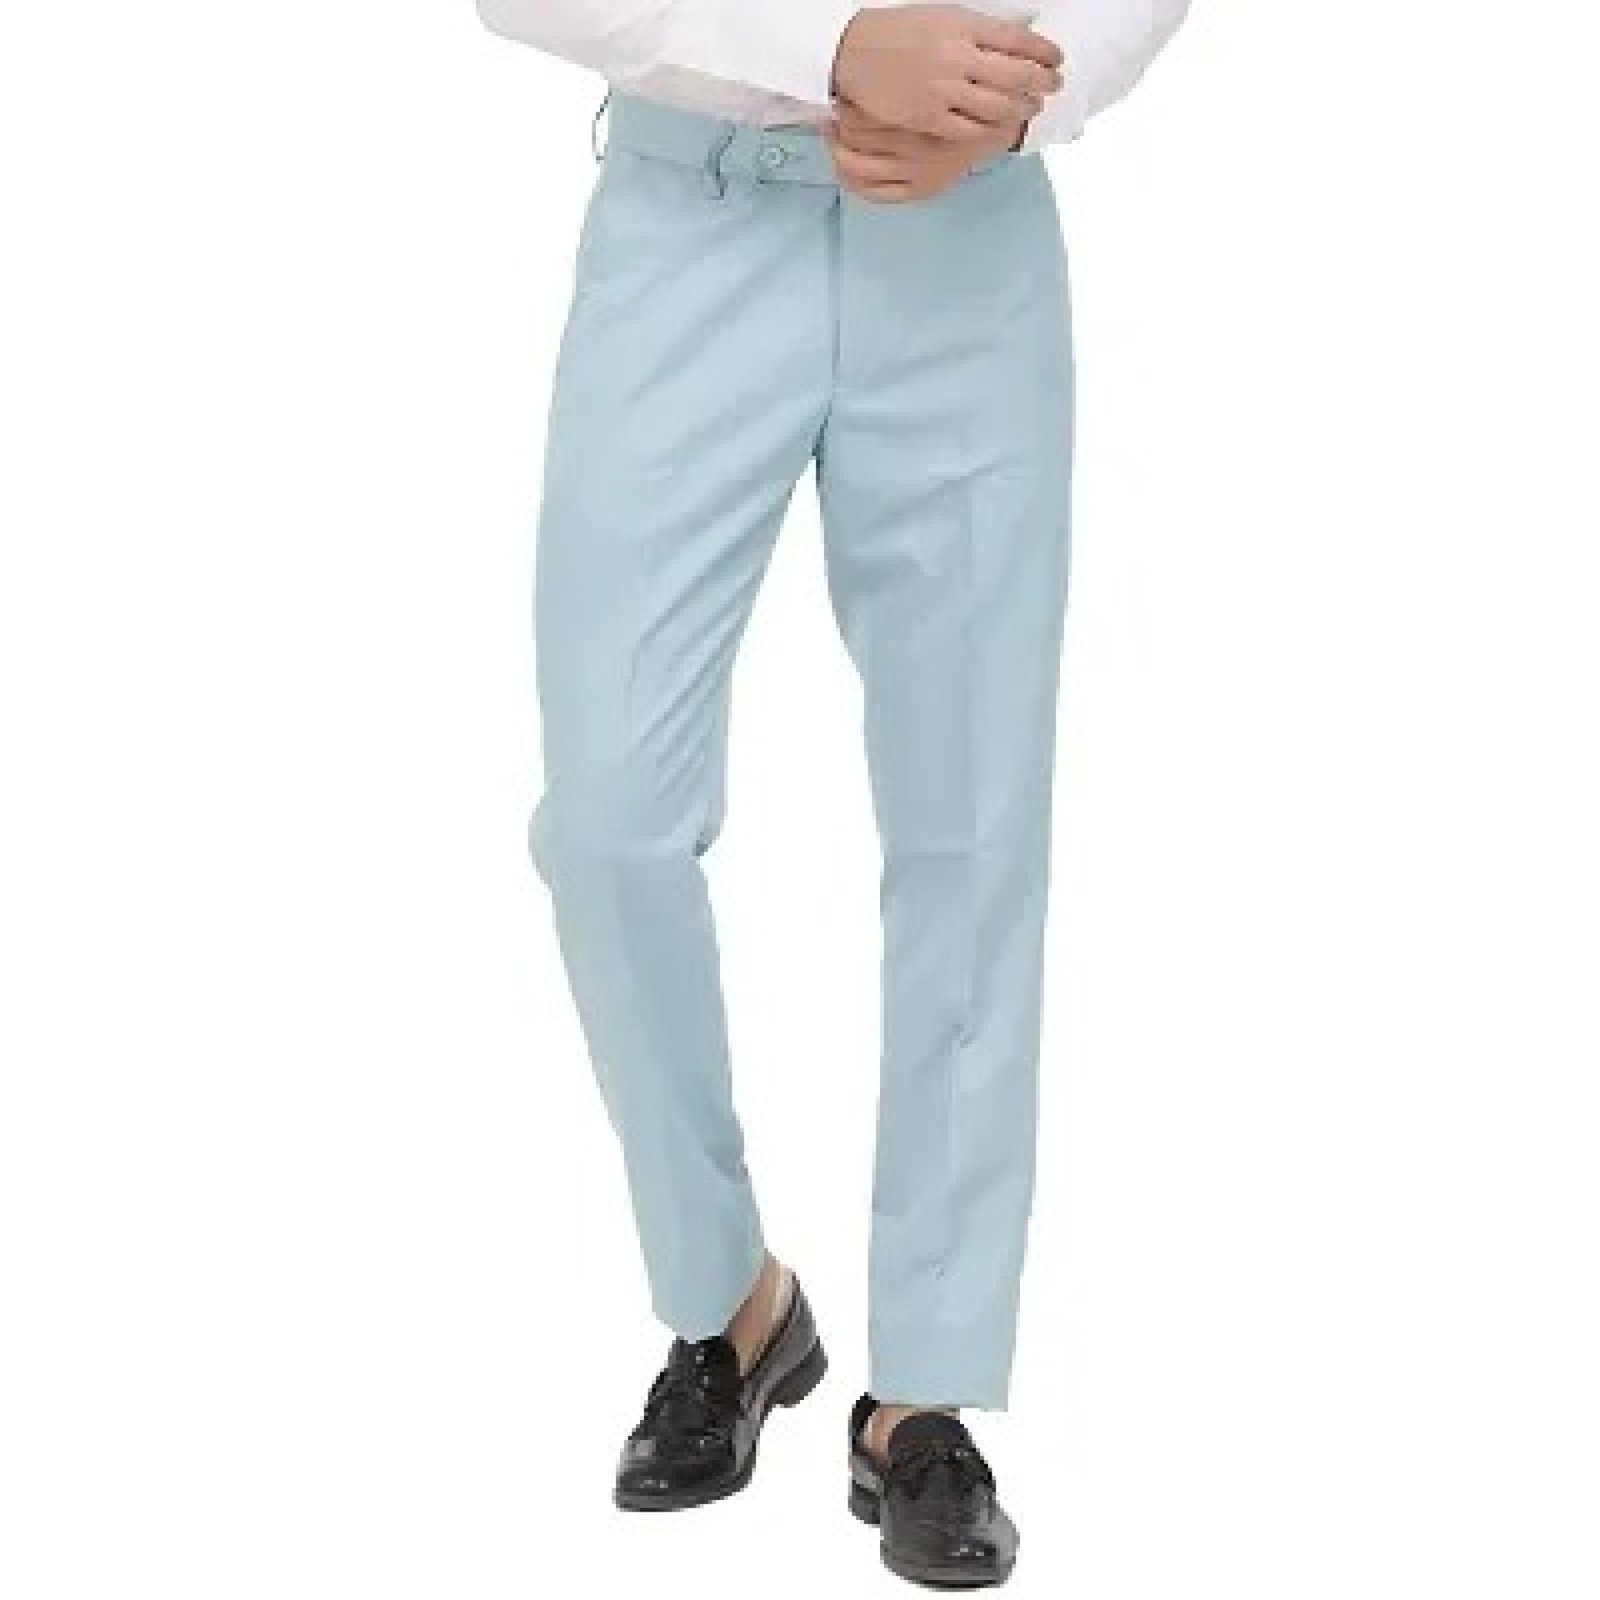 1880 Club Trousers Slim Fit Grey TWIN PACK